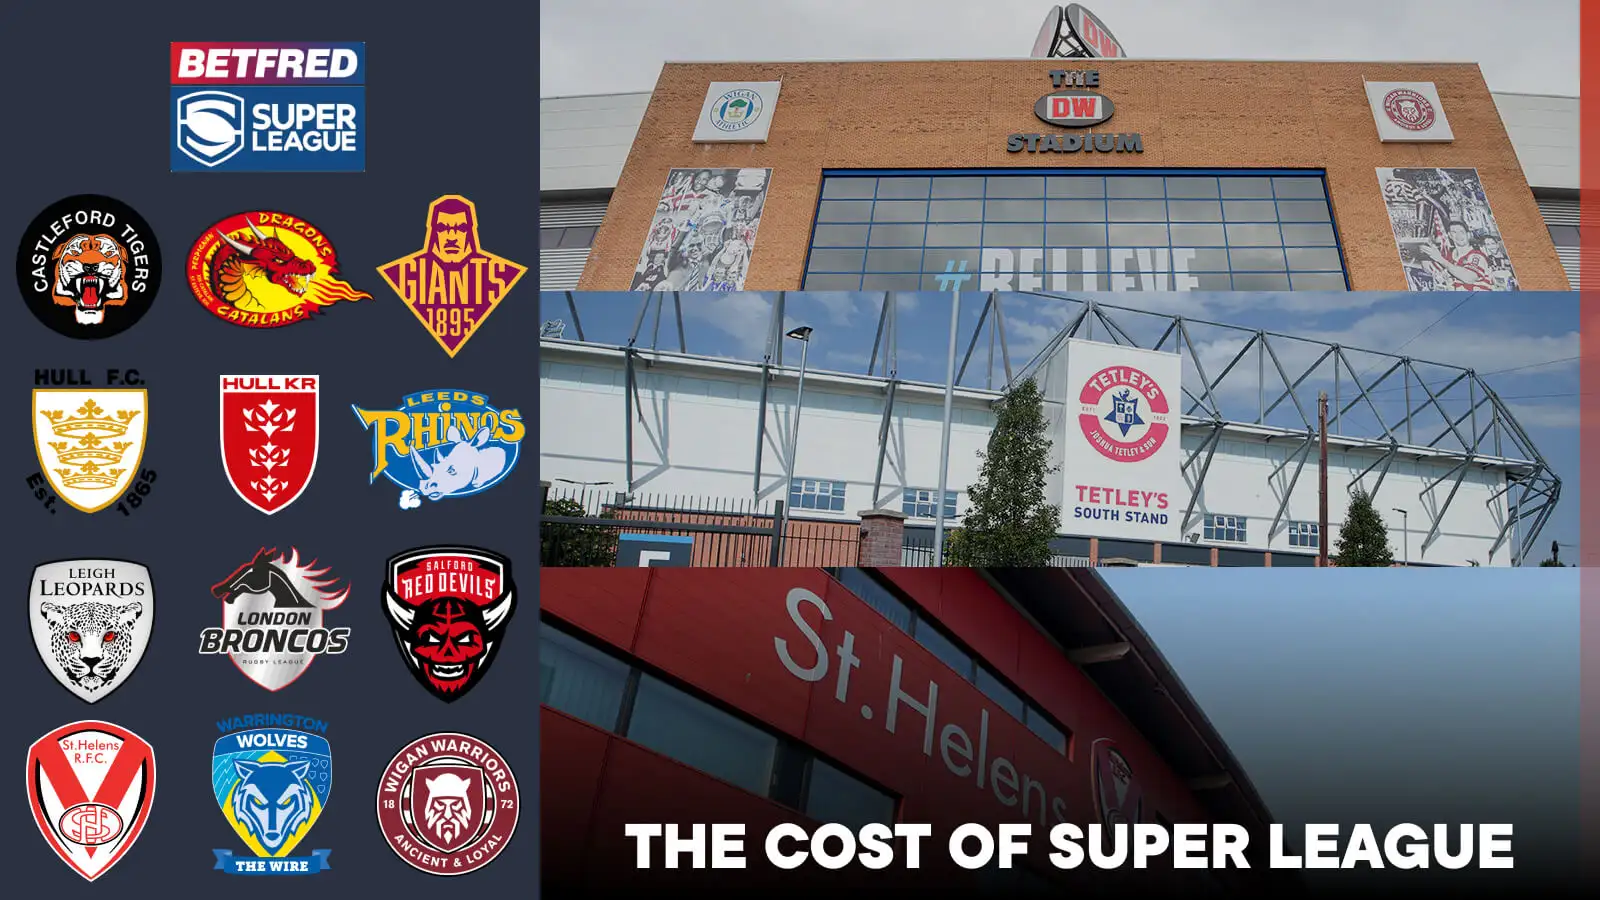 The cost of Super League: Ranking how much it costs to support your club